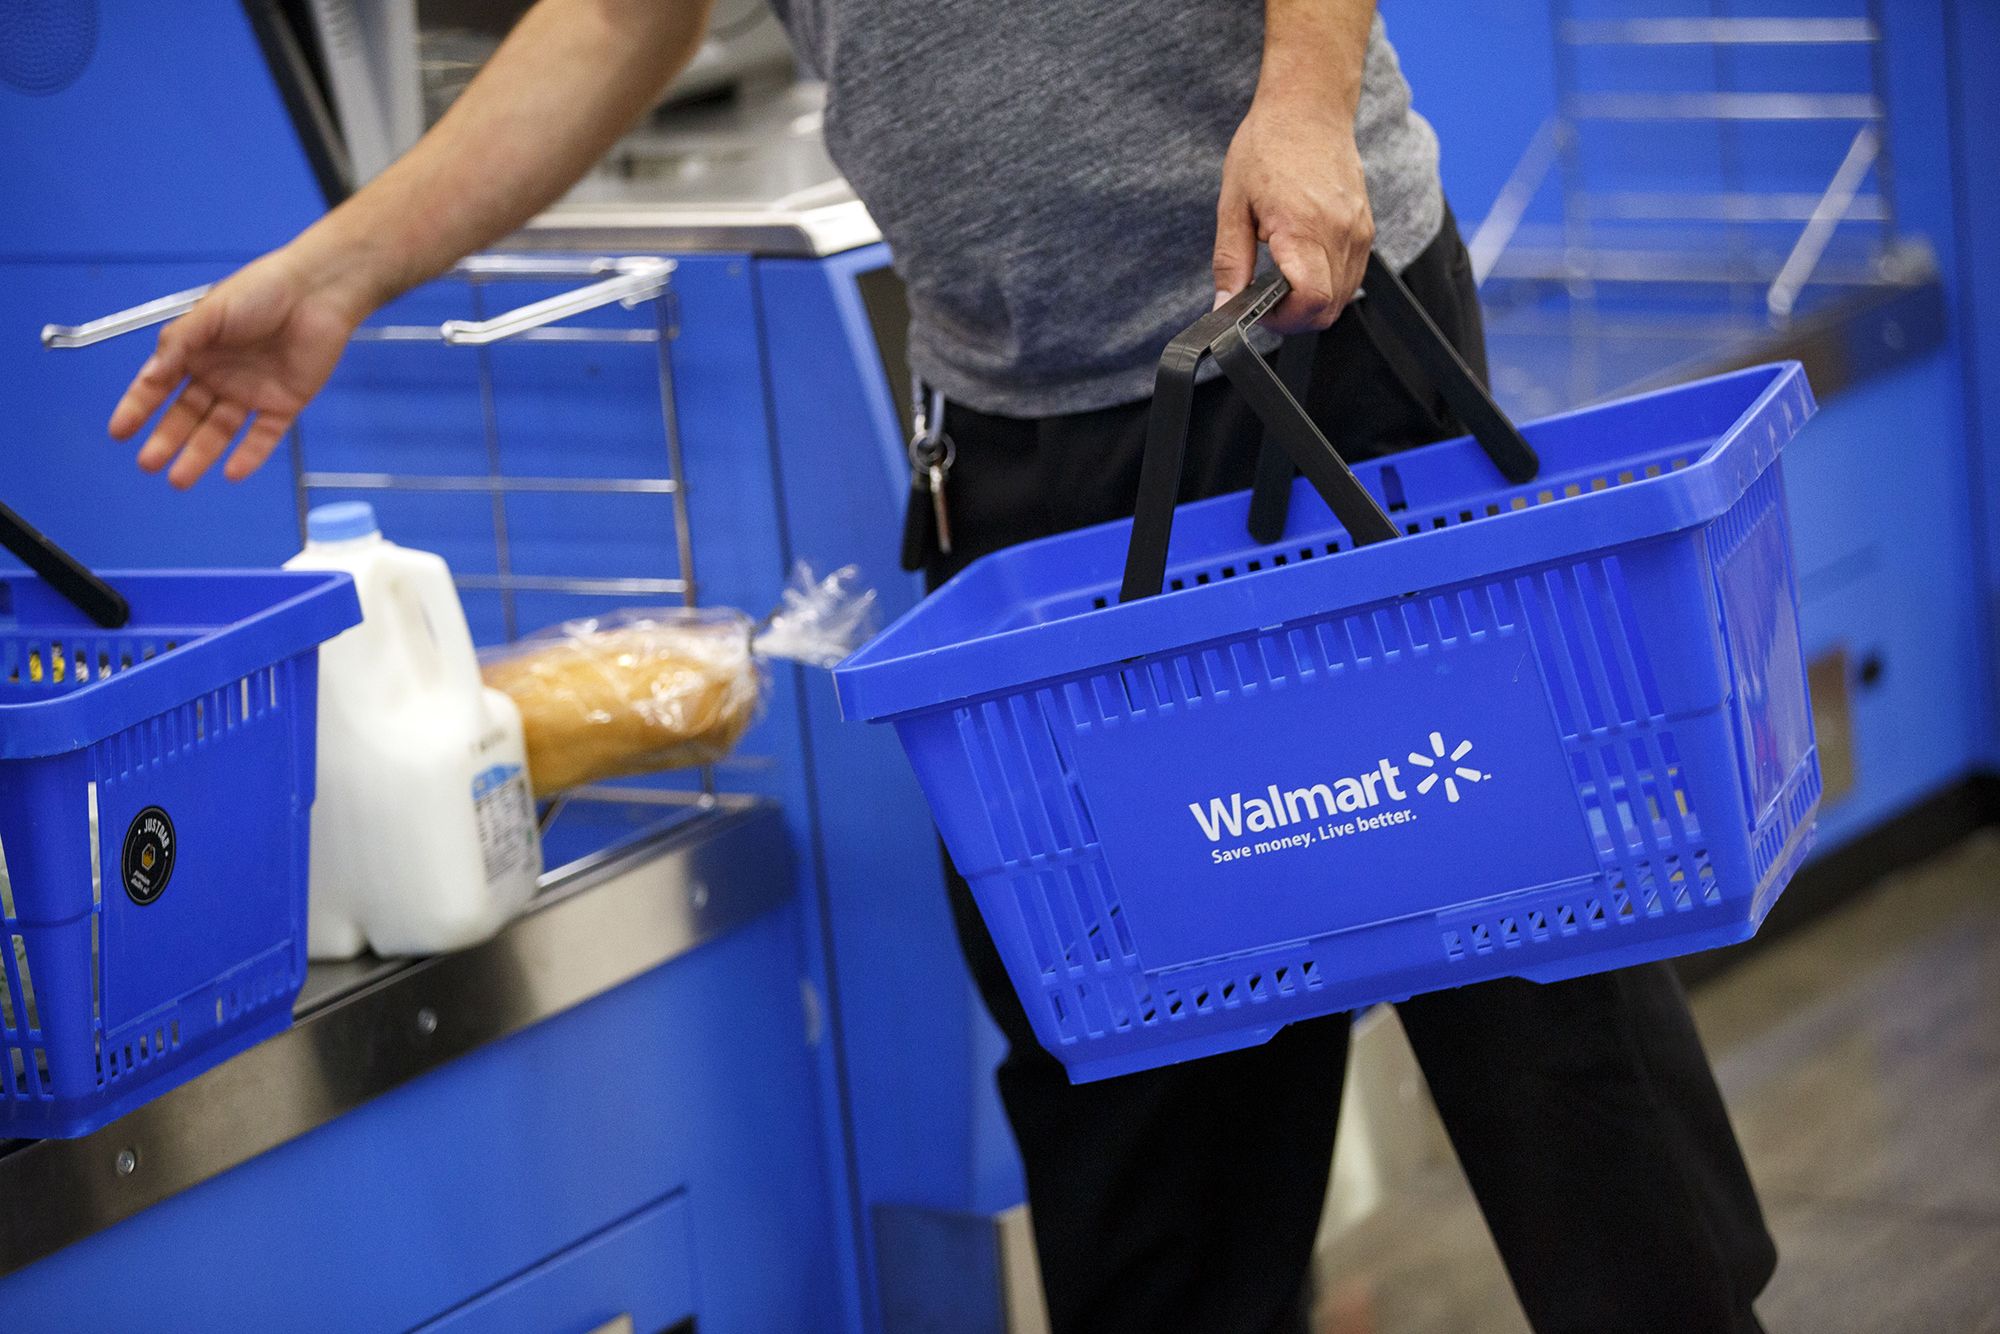 Why New York women are secretly shopping at Walmart